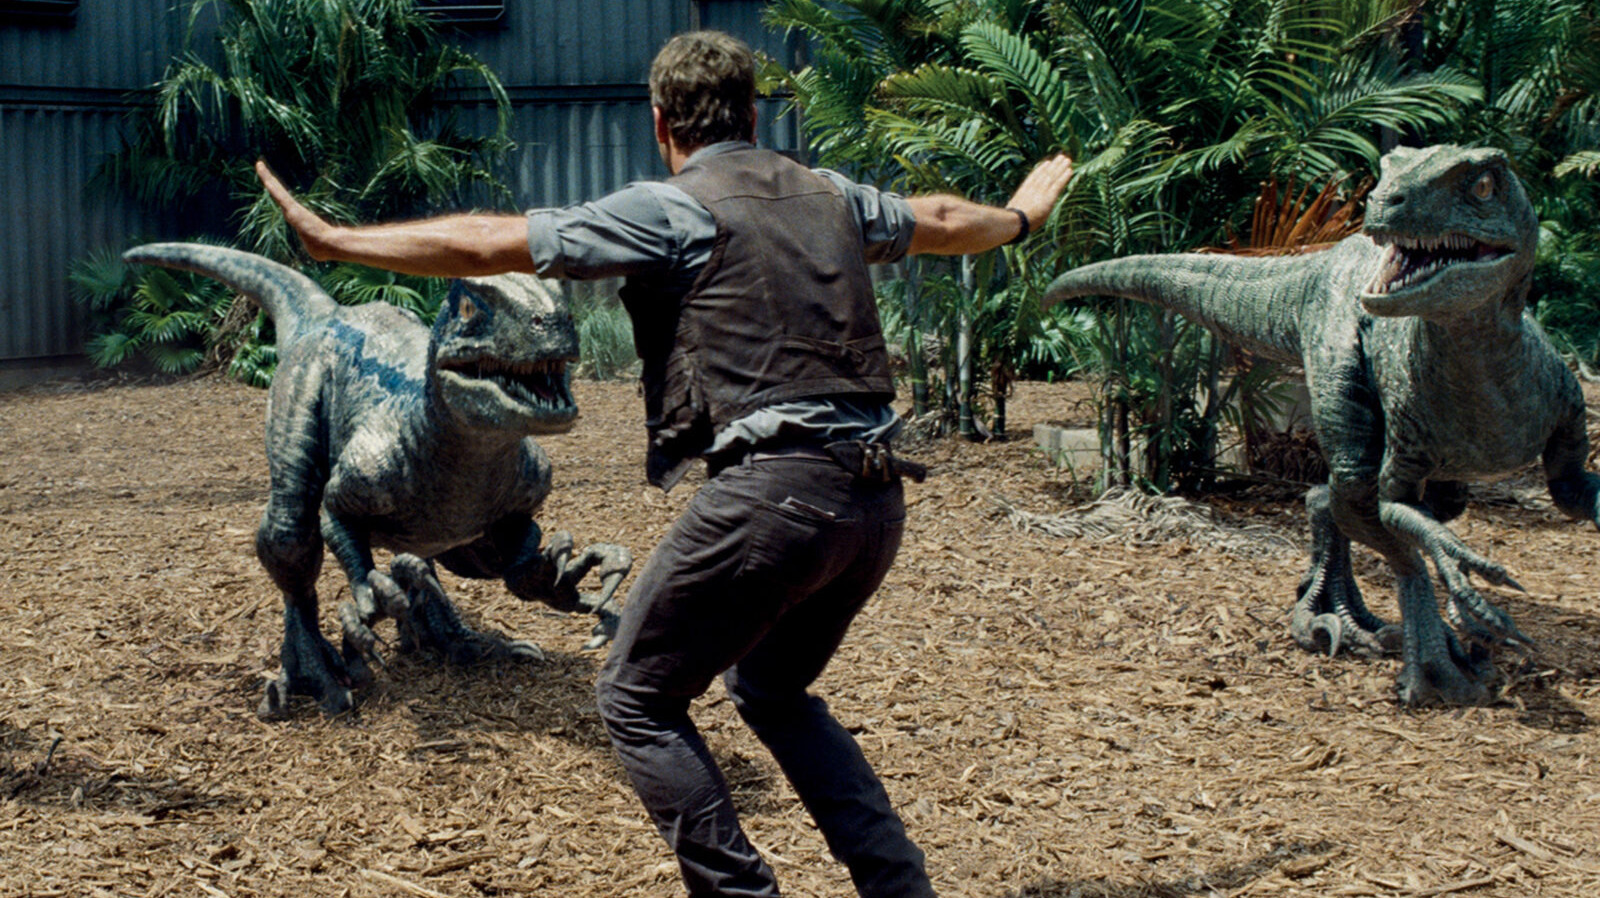 A new nonfiction book makes me want to apologize to Jurassic World